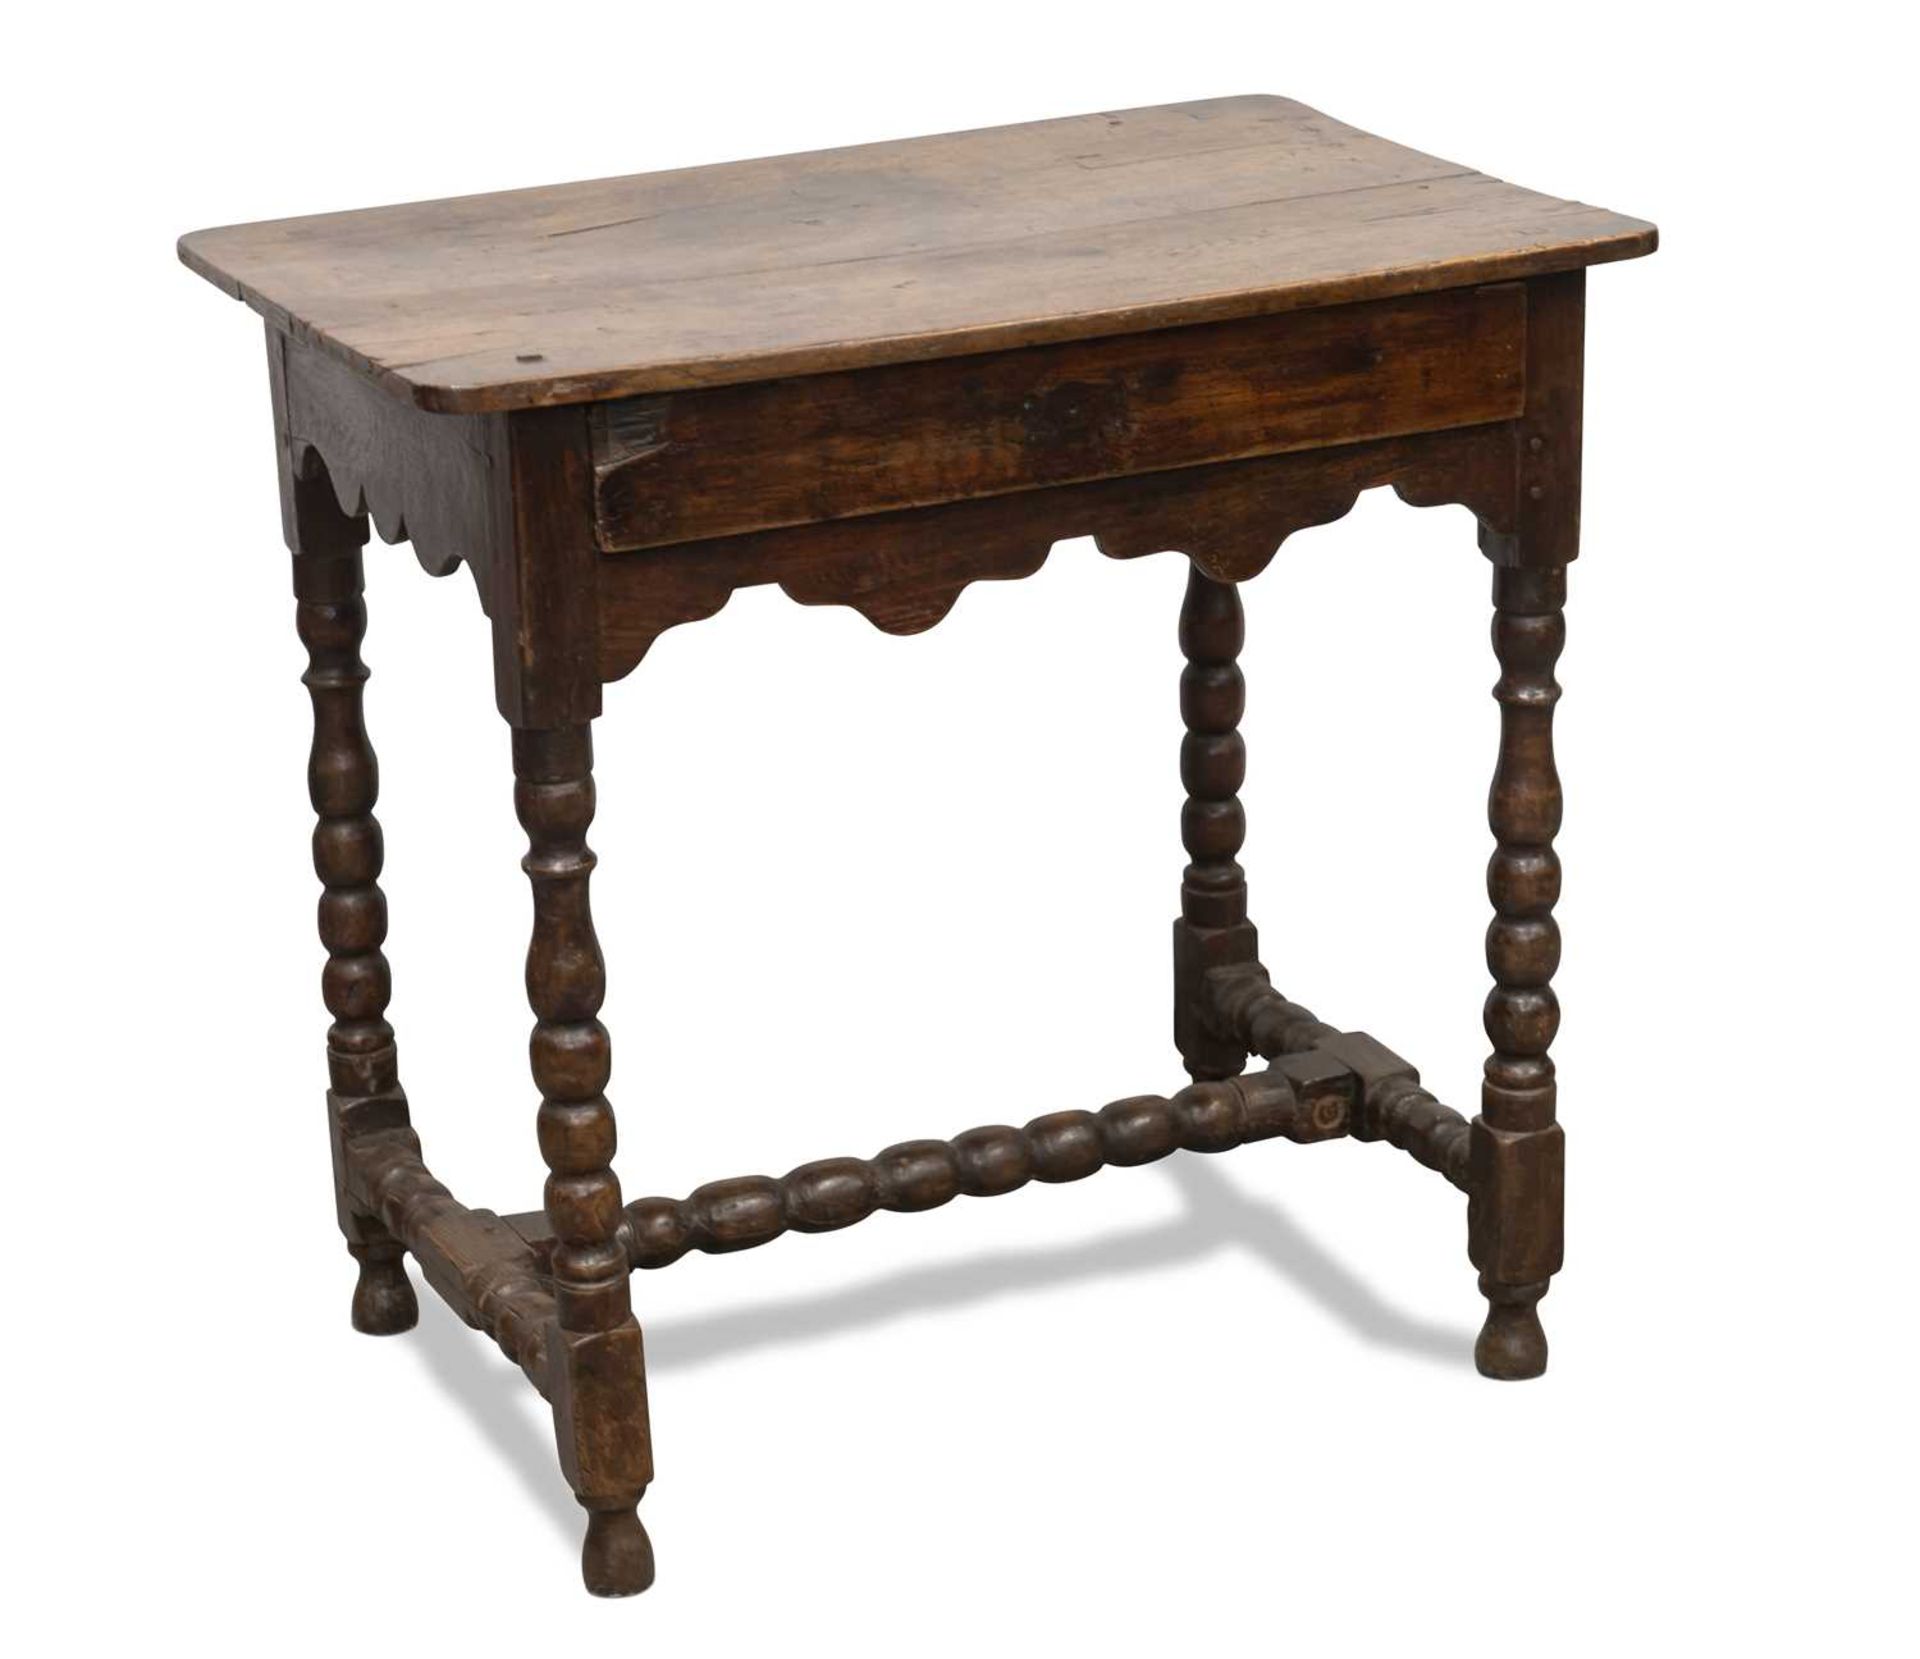 A PRIMITIVE 18TH CENTURY OAK AND PINE SIDE TABLE